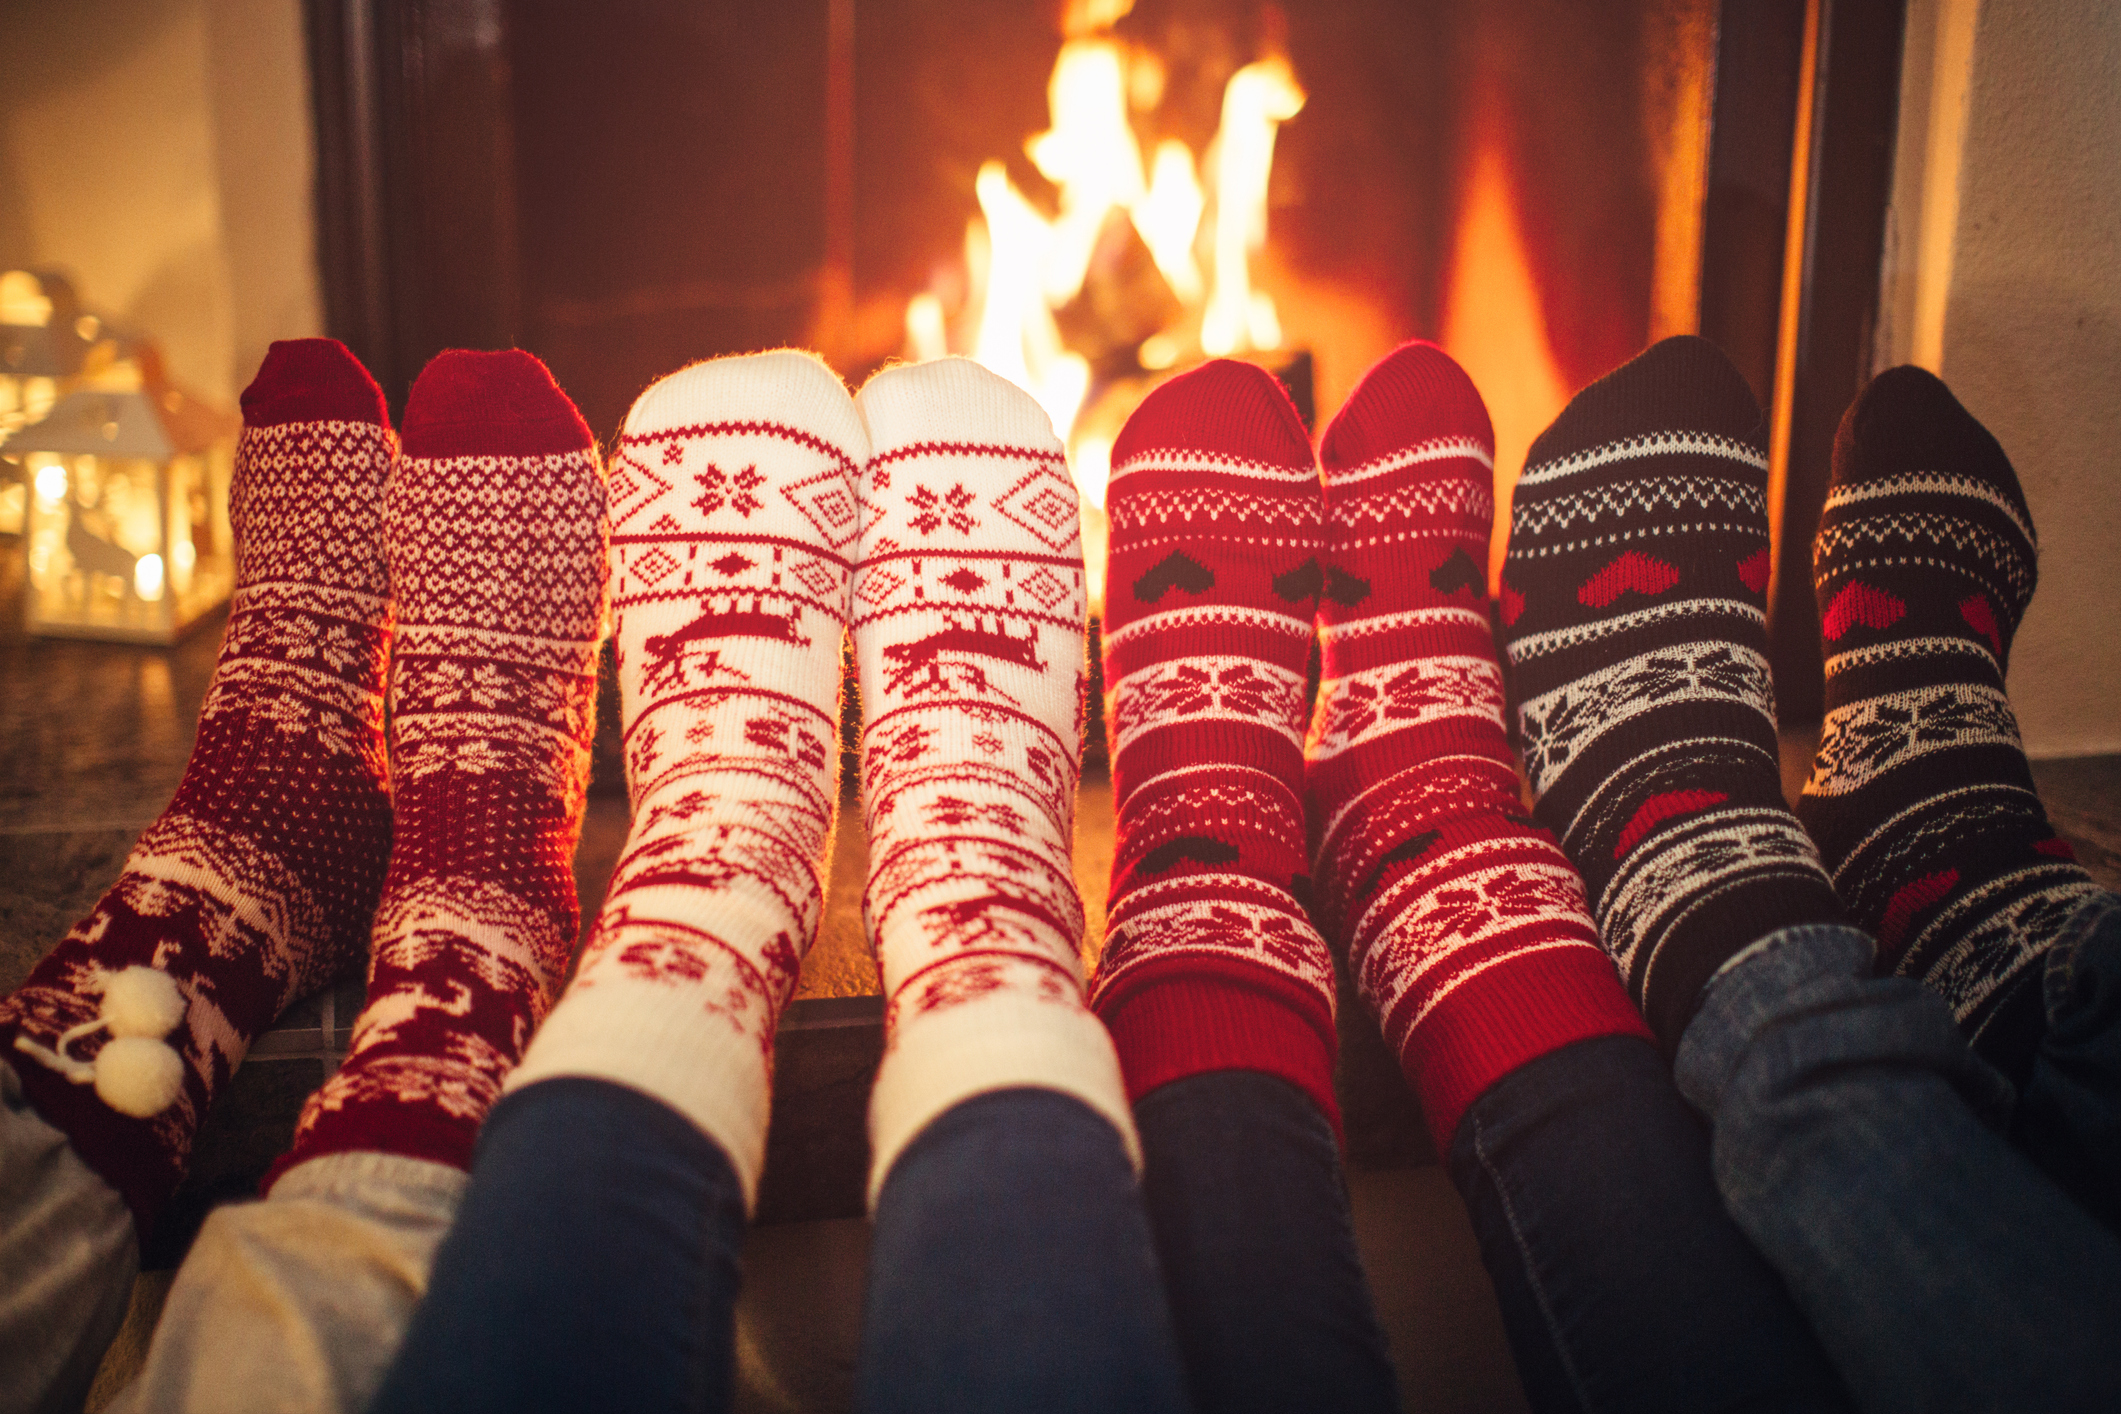 fuzzy holiday socks in front of a fire.